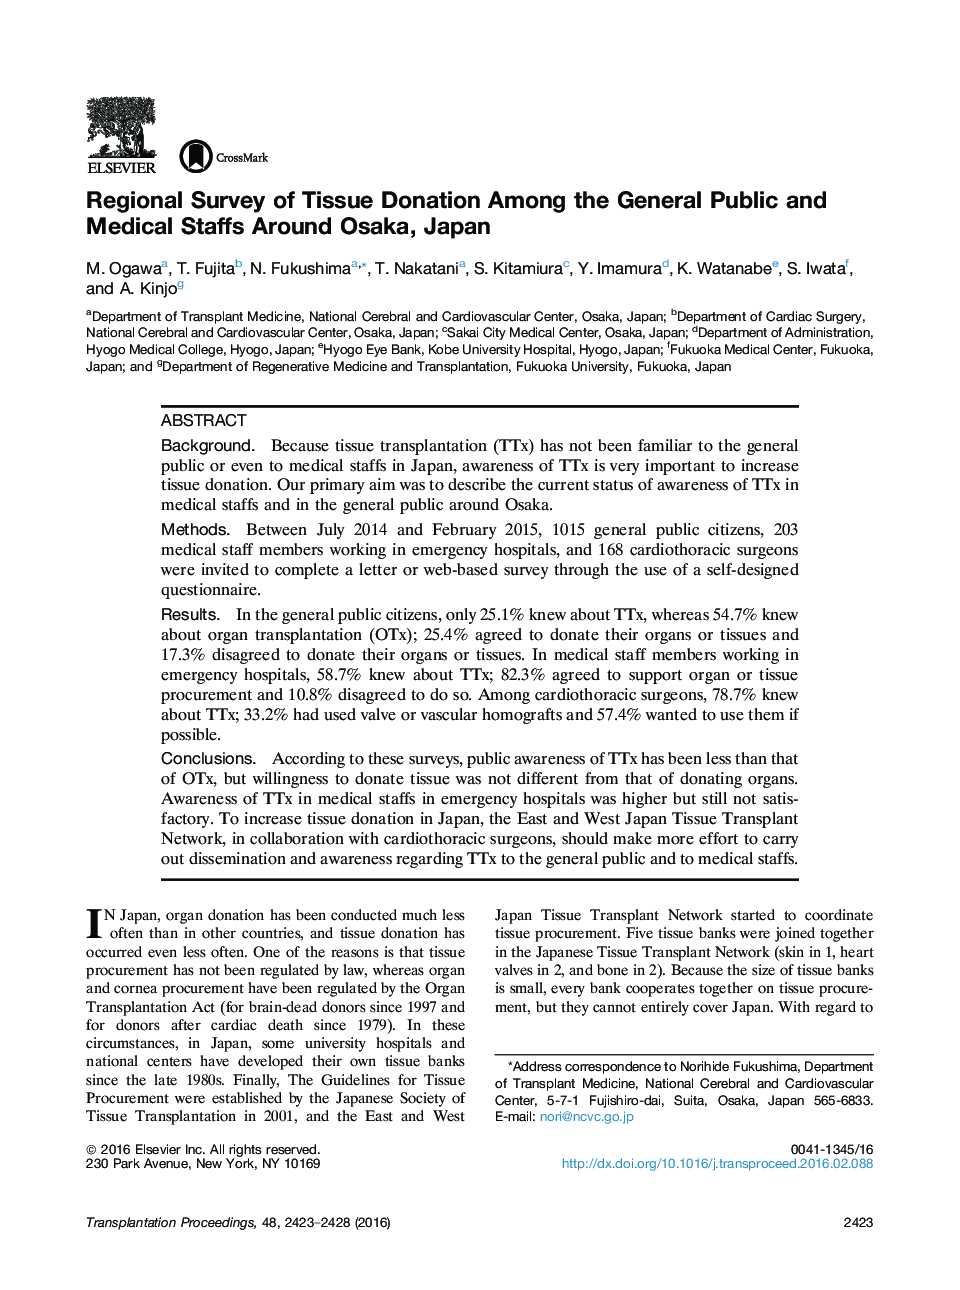 13th Congress of the International Society for Organ Donation and Procurement (ISODP)Surveys regarding donationRegional Survey of Tissue Donation Among the General Public and Medical Staffs Around Osaka, Japan